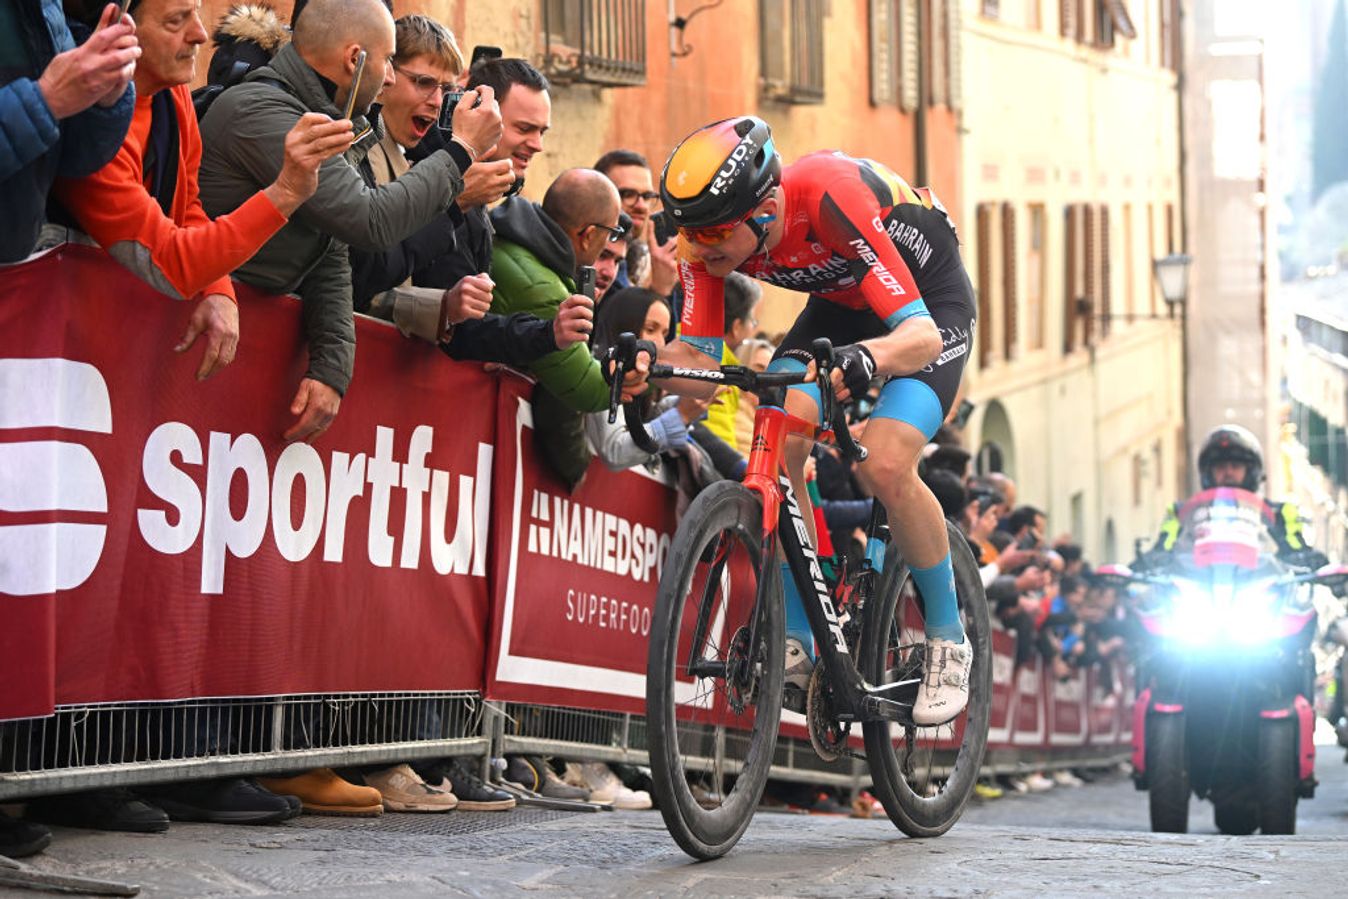 Matej Mahorič has had strong but not spectacular rides at Strade Bianche over the years